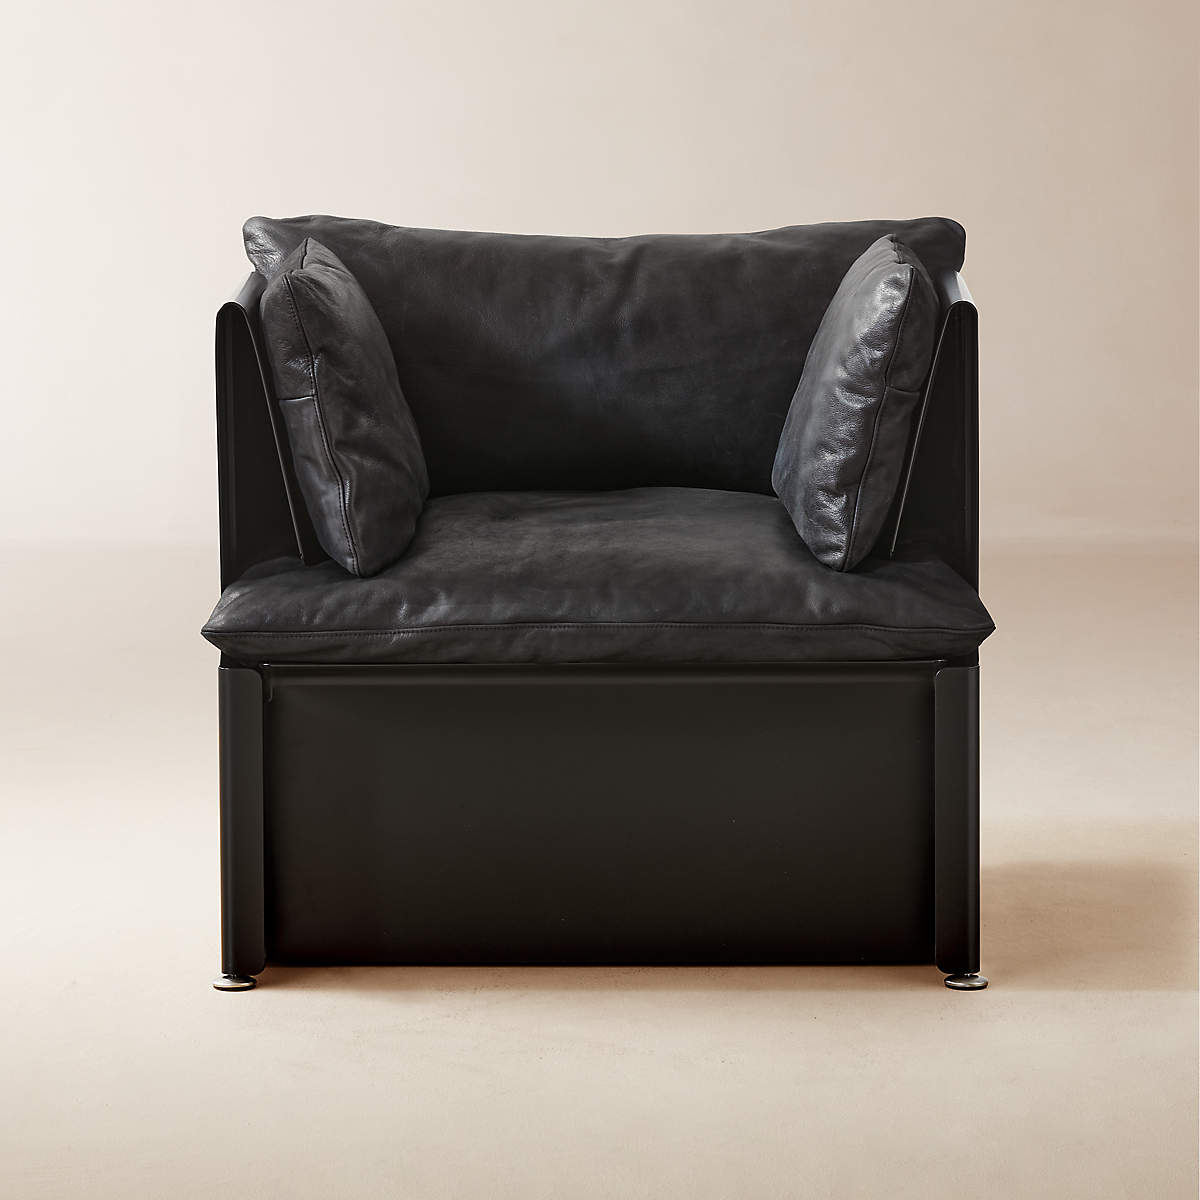 TOL BLACK LEATHER CHAIR